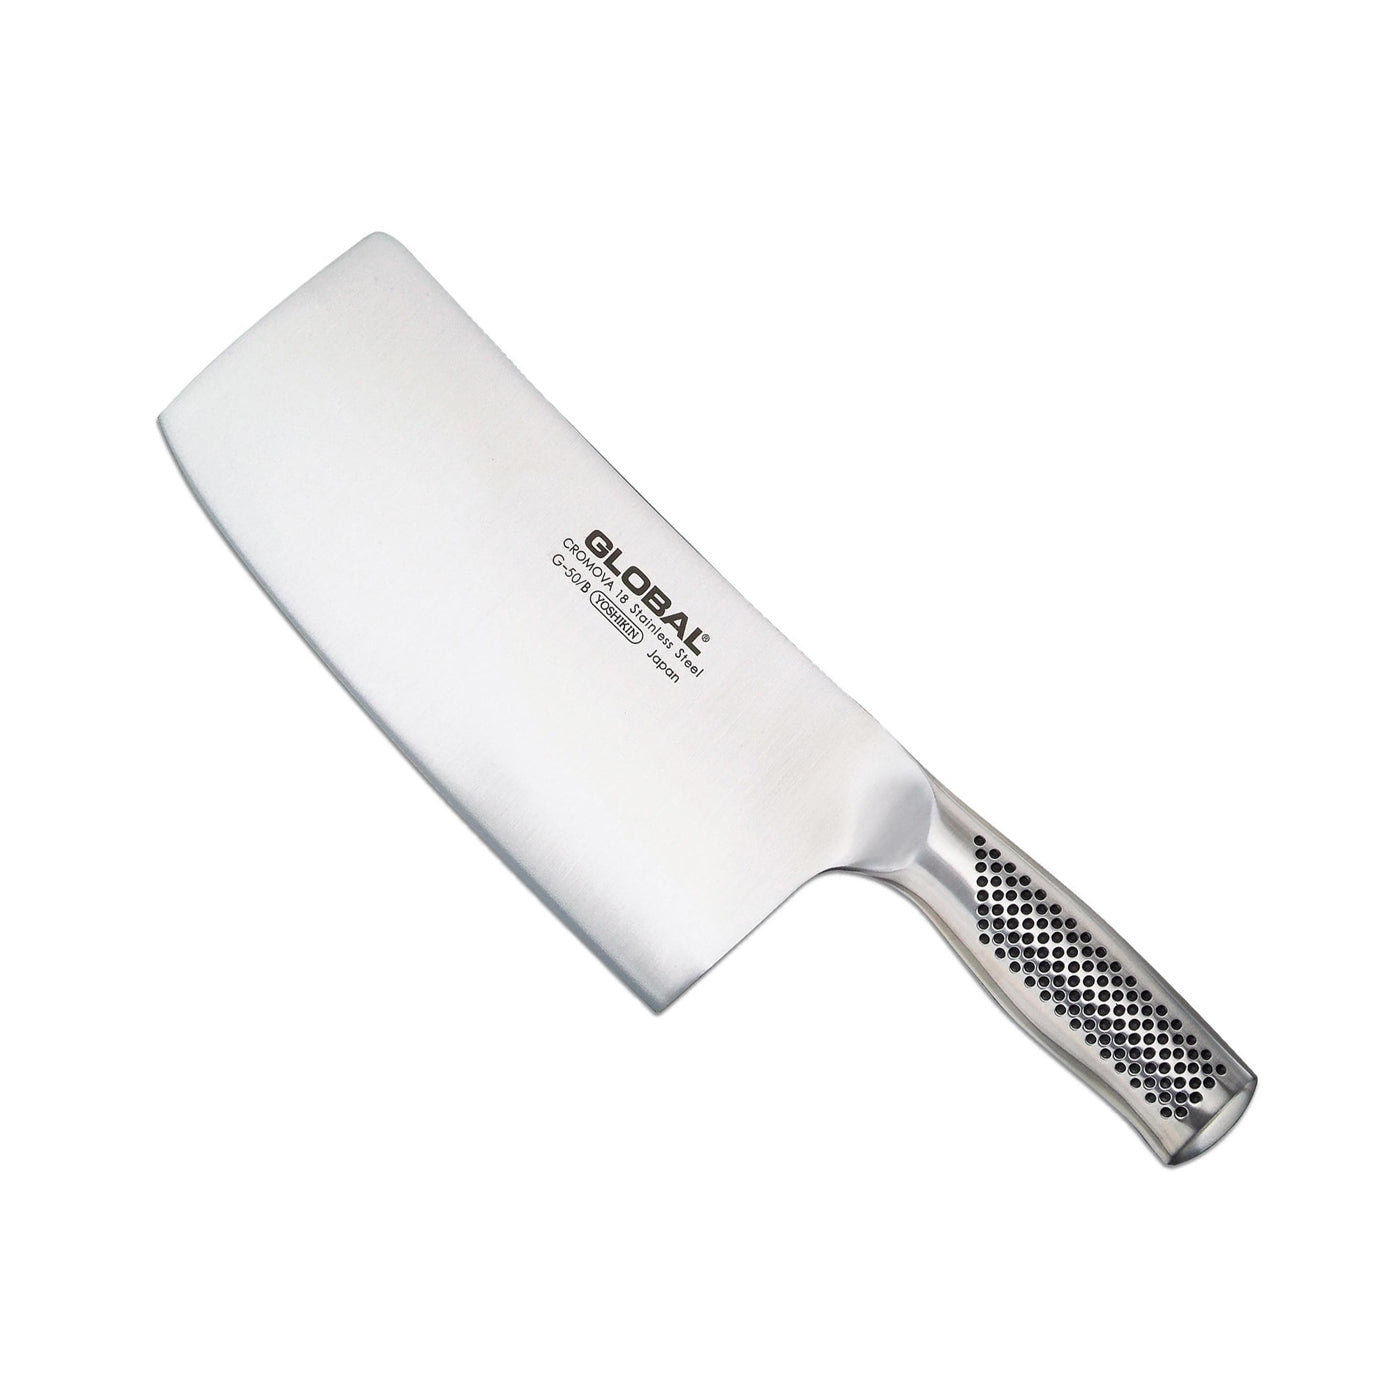  Global Kitchen-Knives Chop & Slice 7-Inch Chinese Chef's Knife/ Cleaver, Stainless Steel: Home & Kitchen